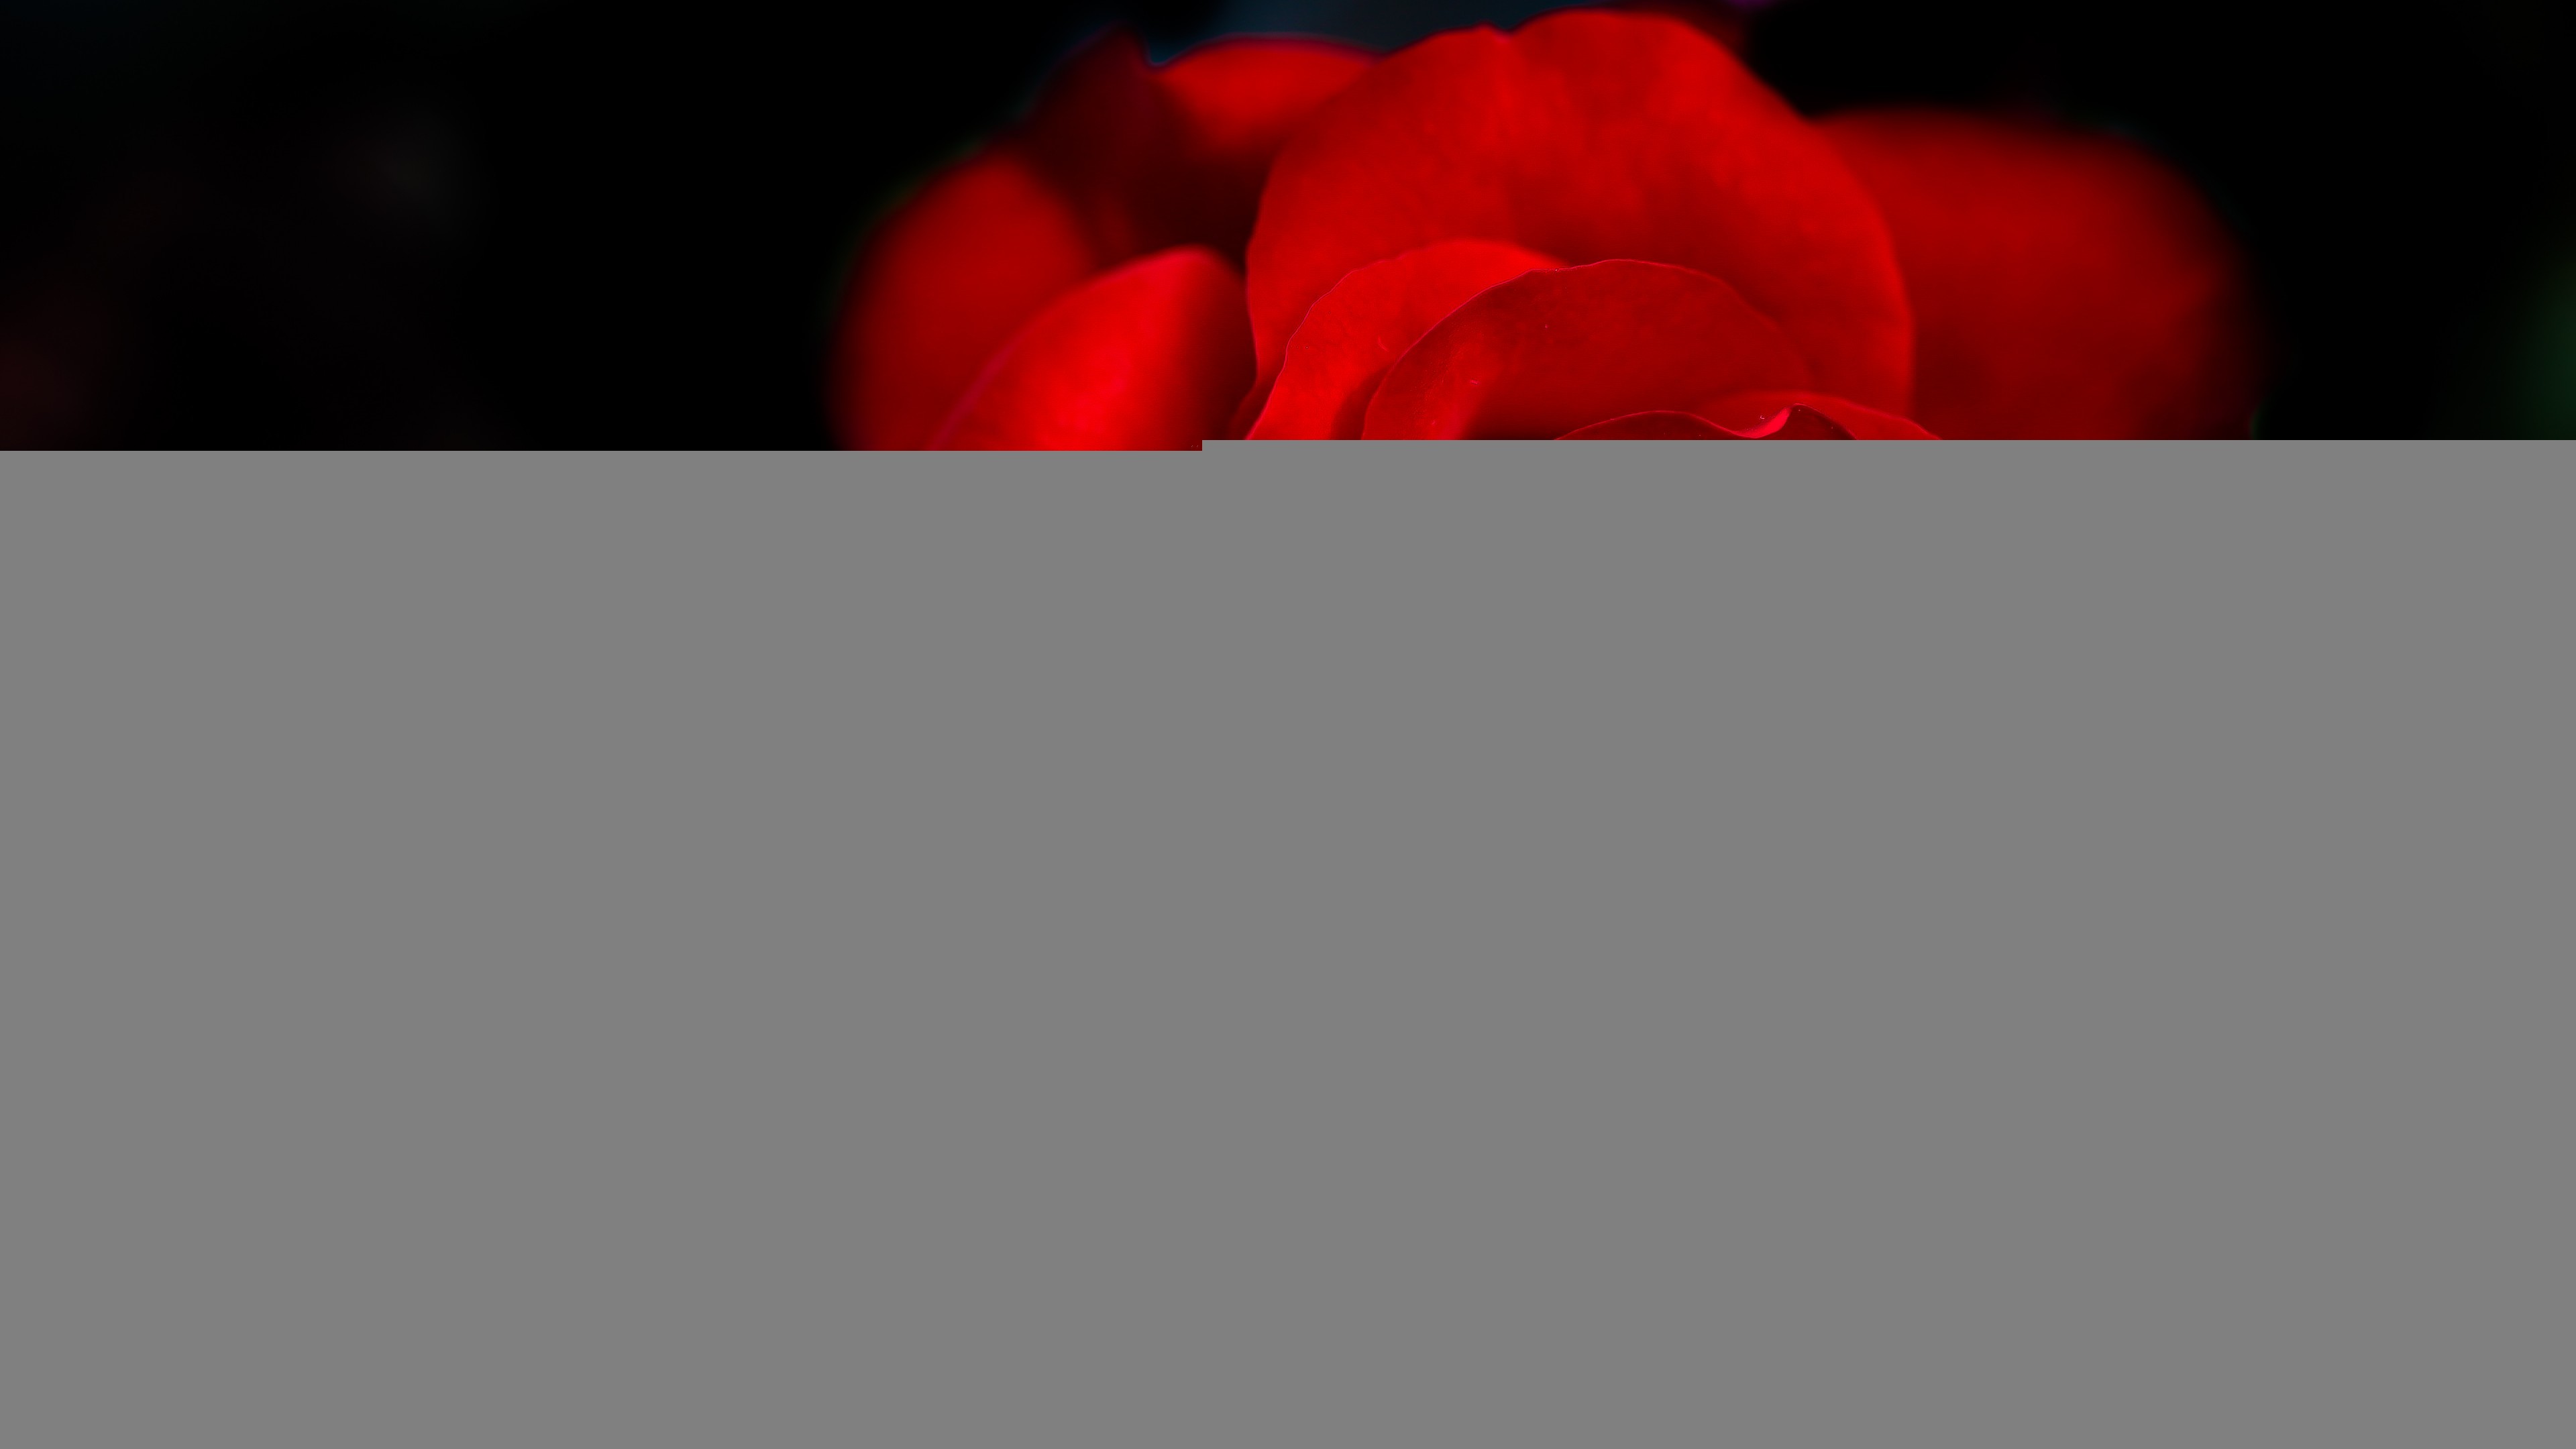 3840x2160 Flowers / Red Rose Wallpaper